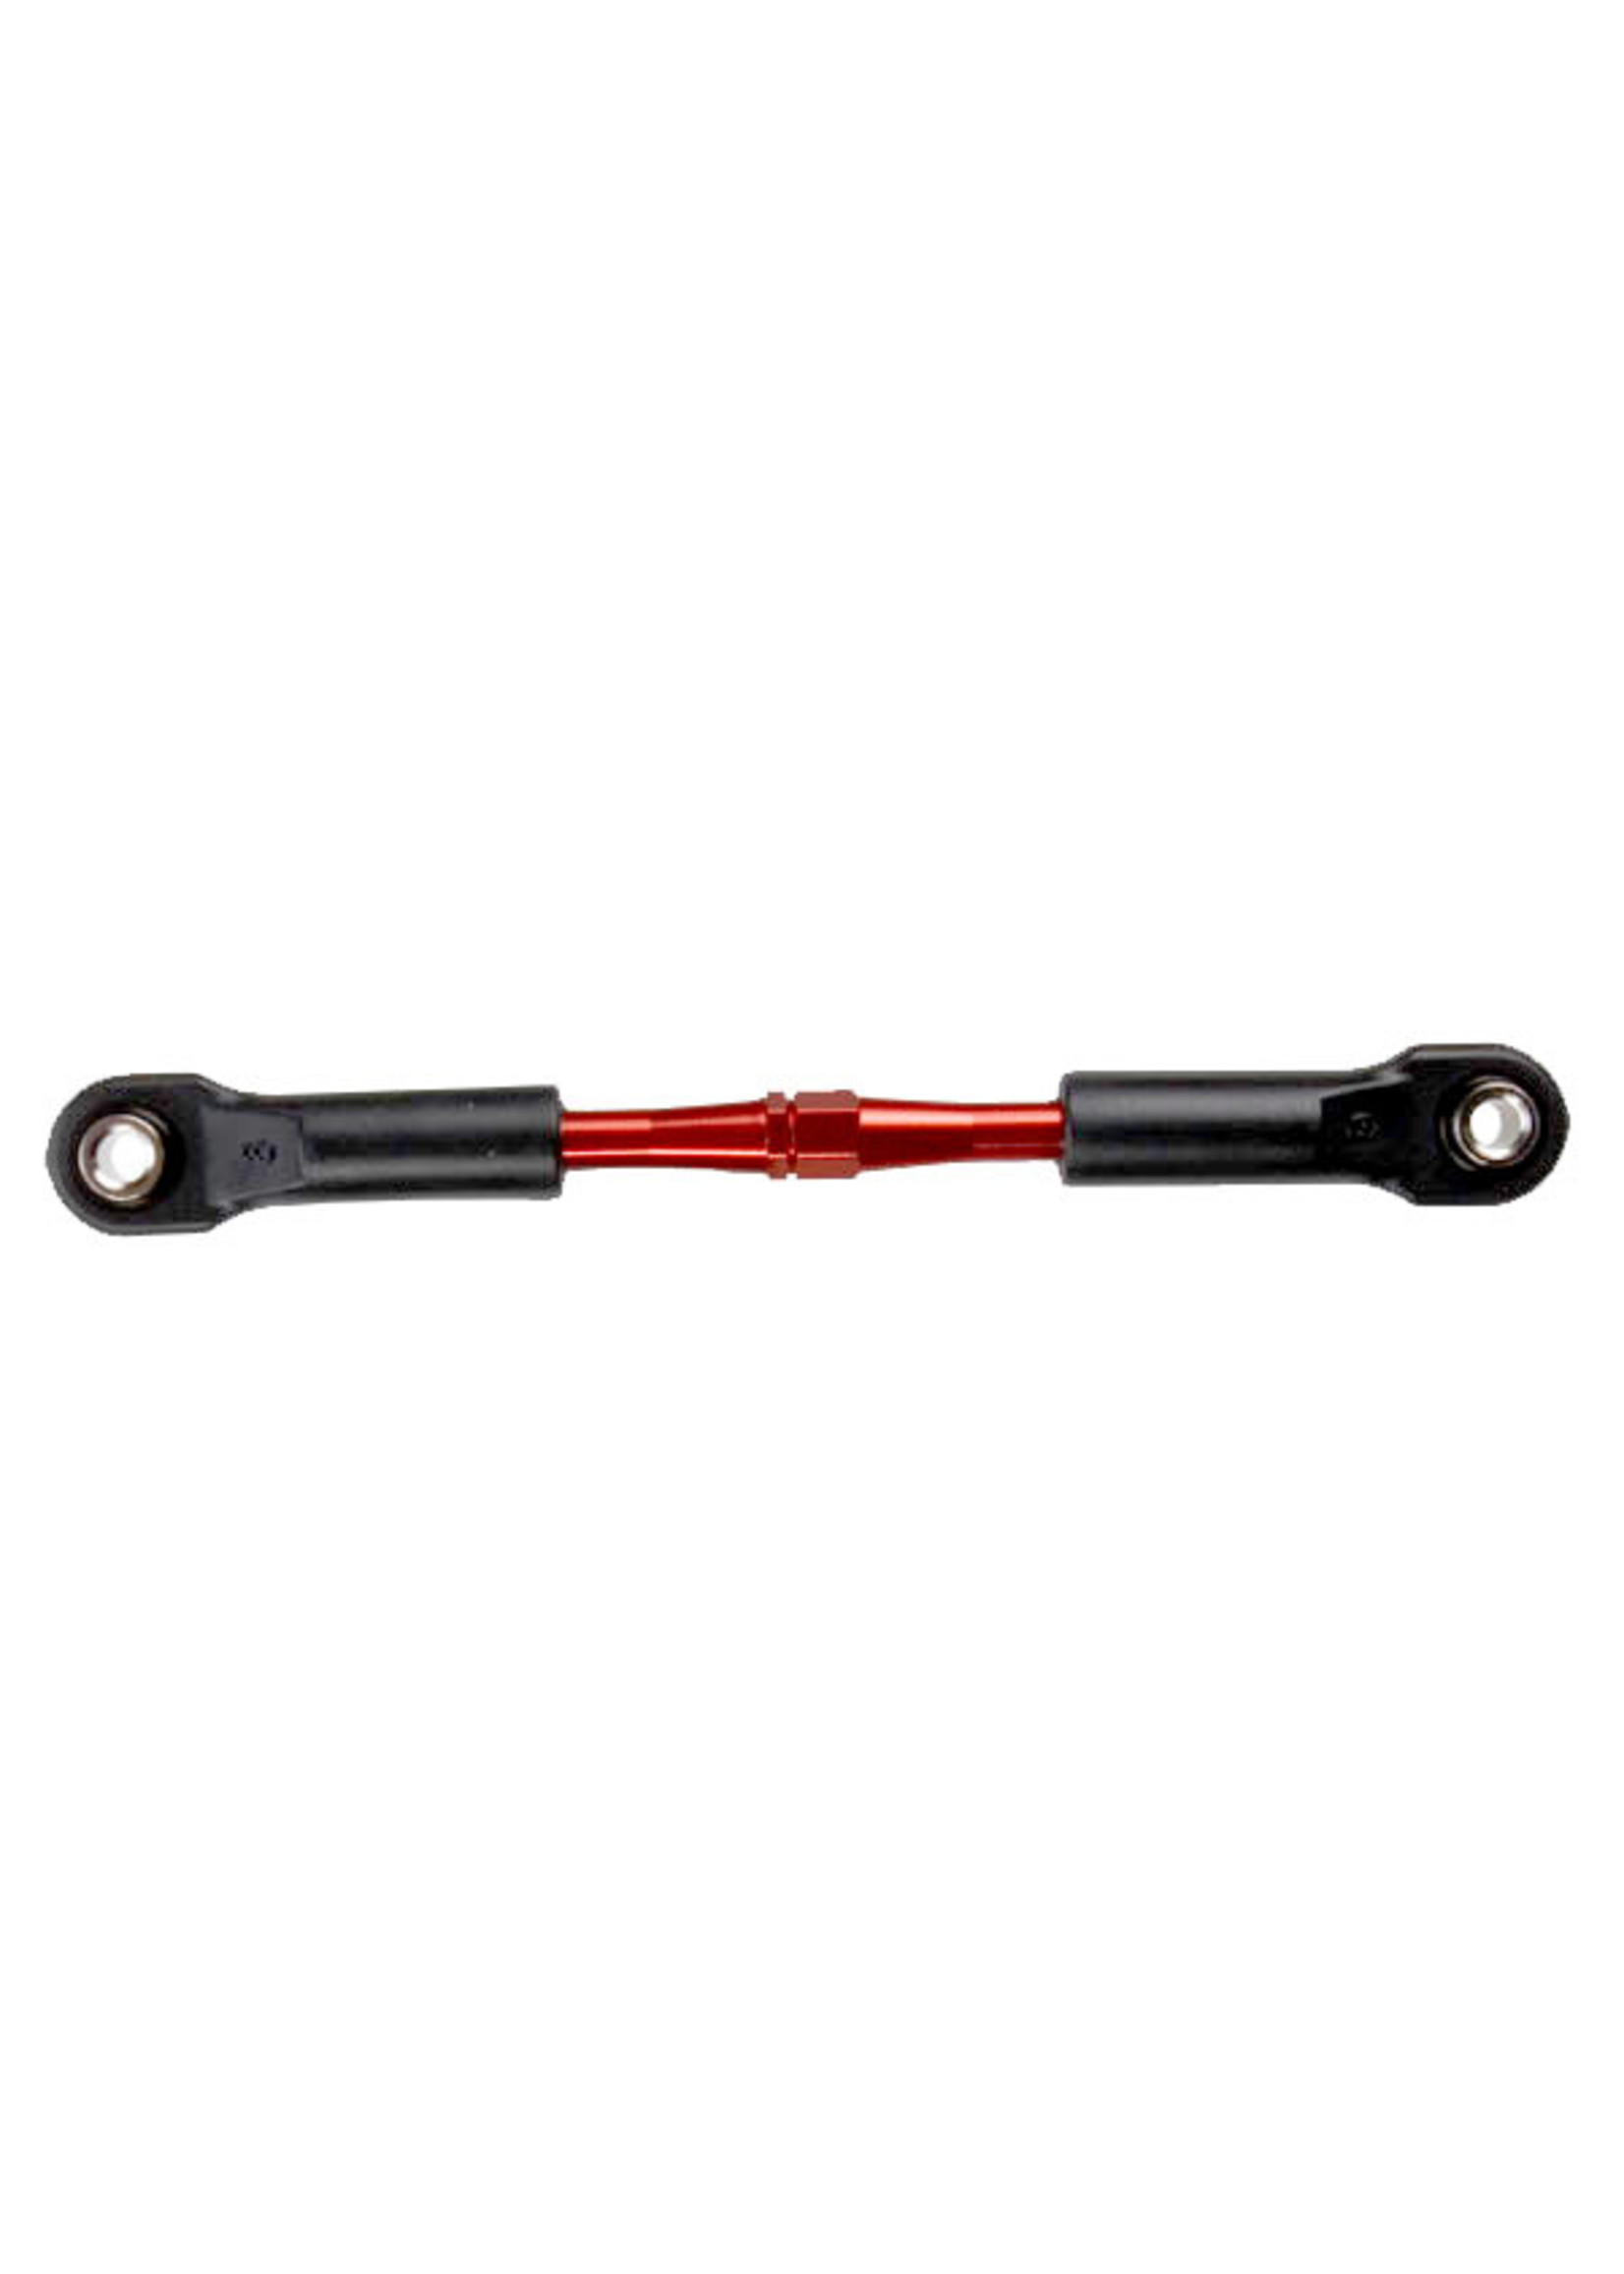 Traxxas 3738 - Aluminum Camber Link Rear Turnbuckle, 49mm - Red